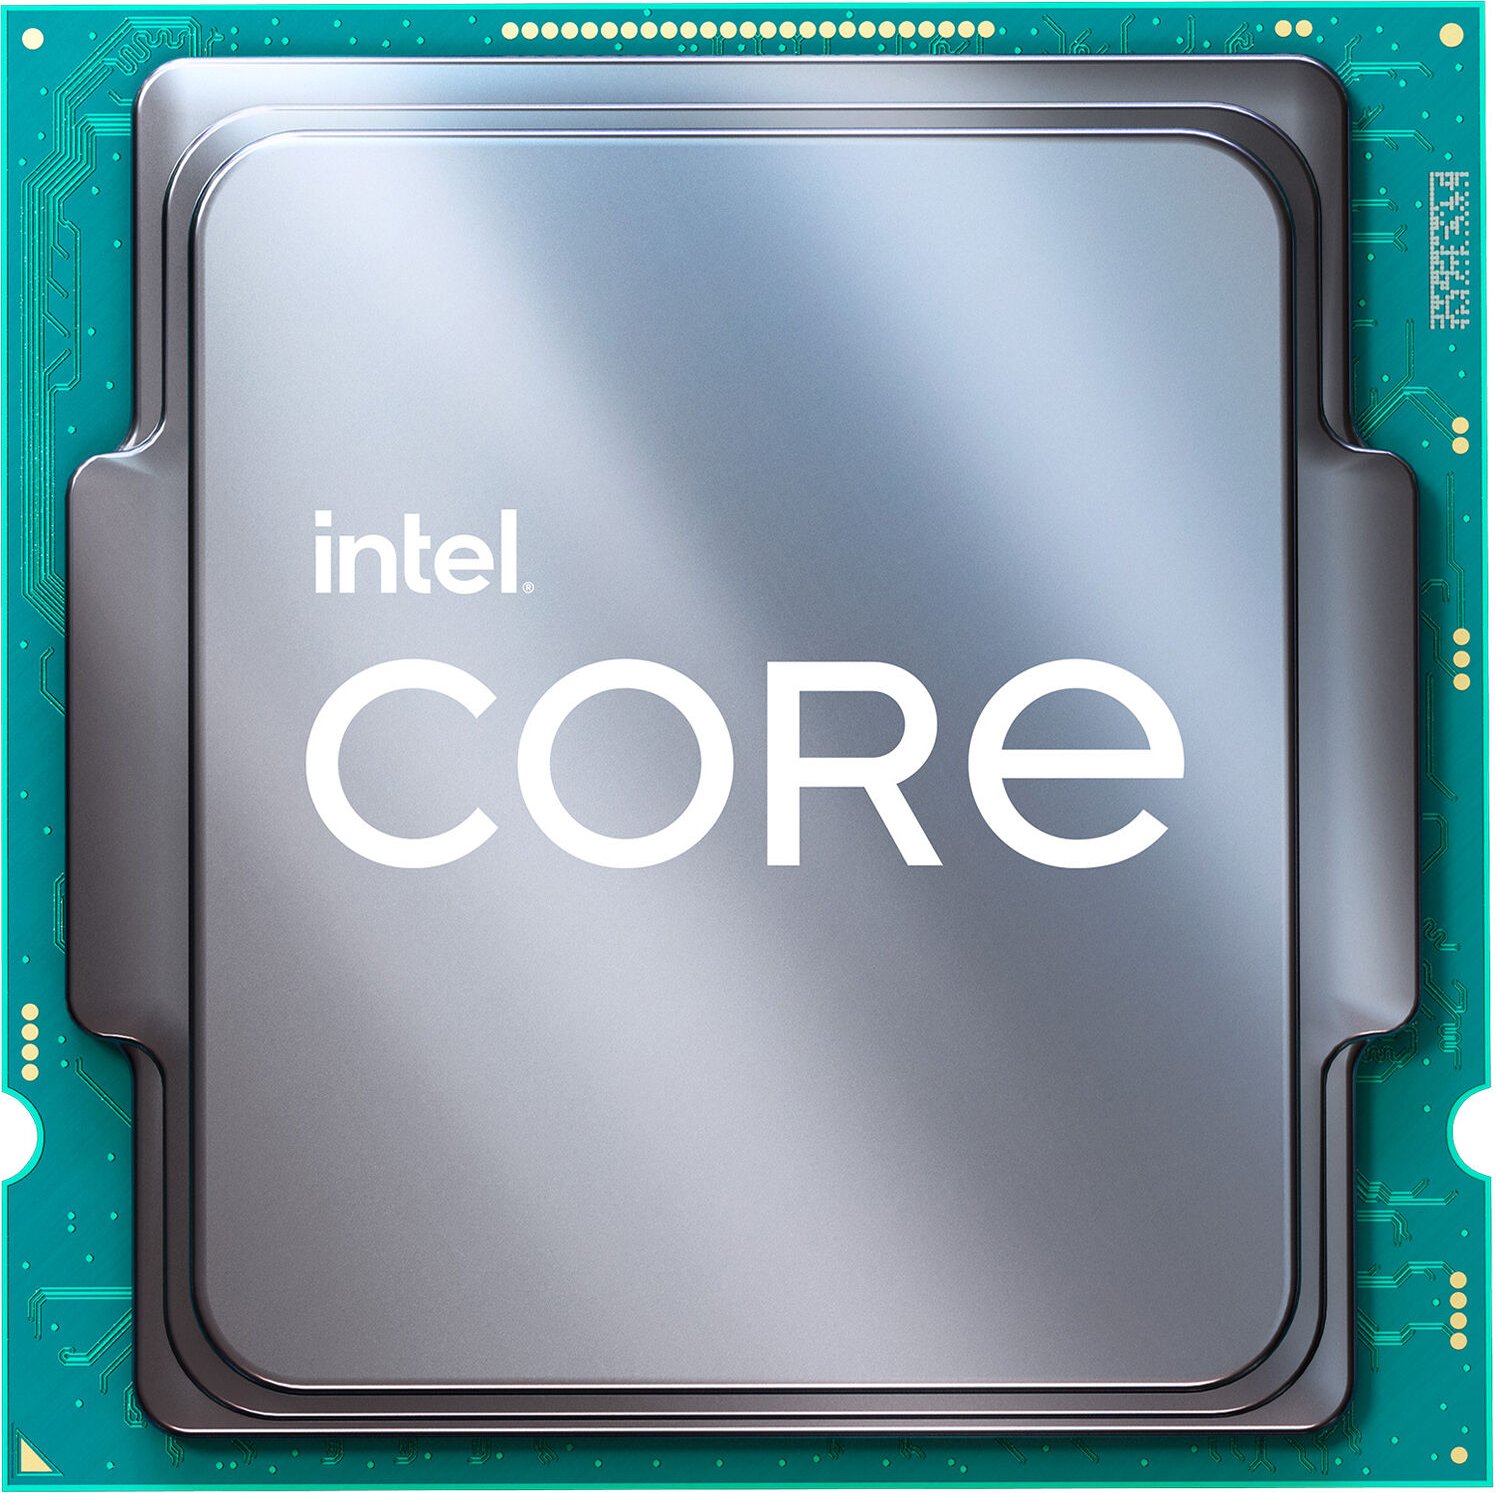 Intel Core i5-11400 Review: Unseating Ryzen's Budget Gaming